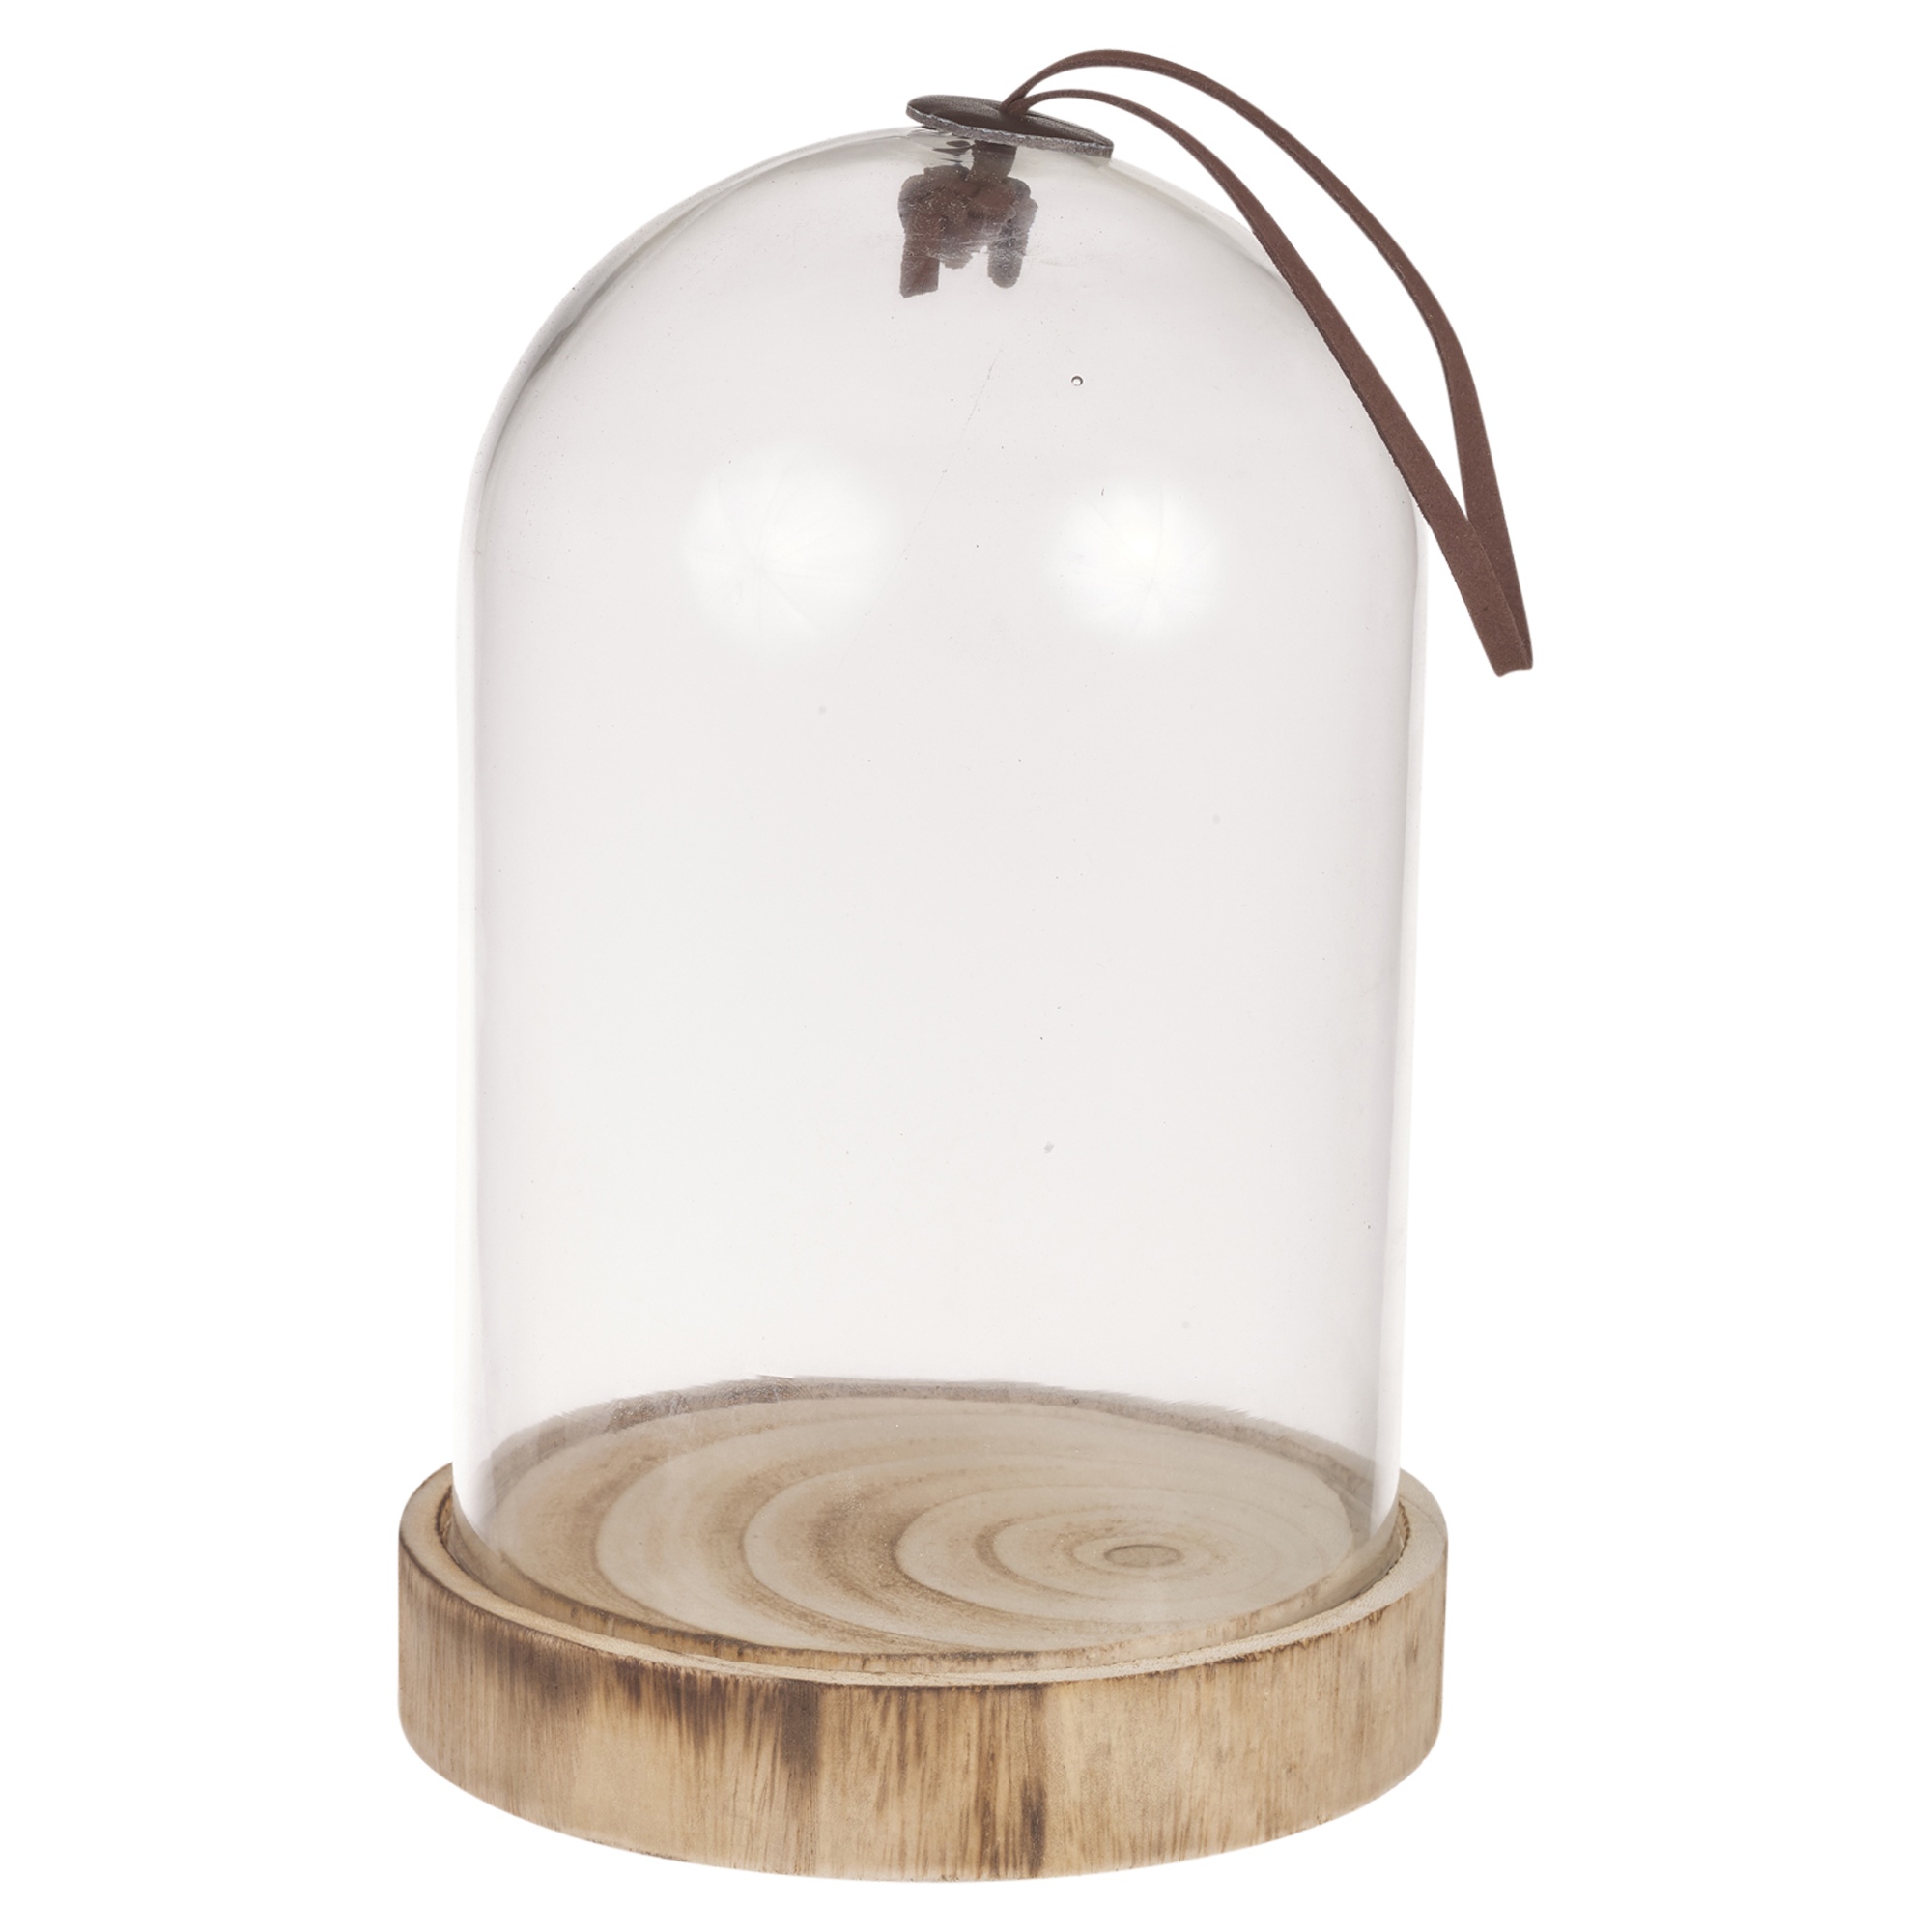 Large Glass Dome Display Bell Jar Cloche on Wooden Base Decorative Desk